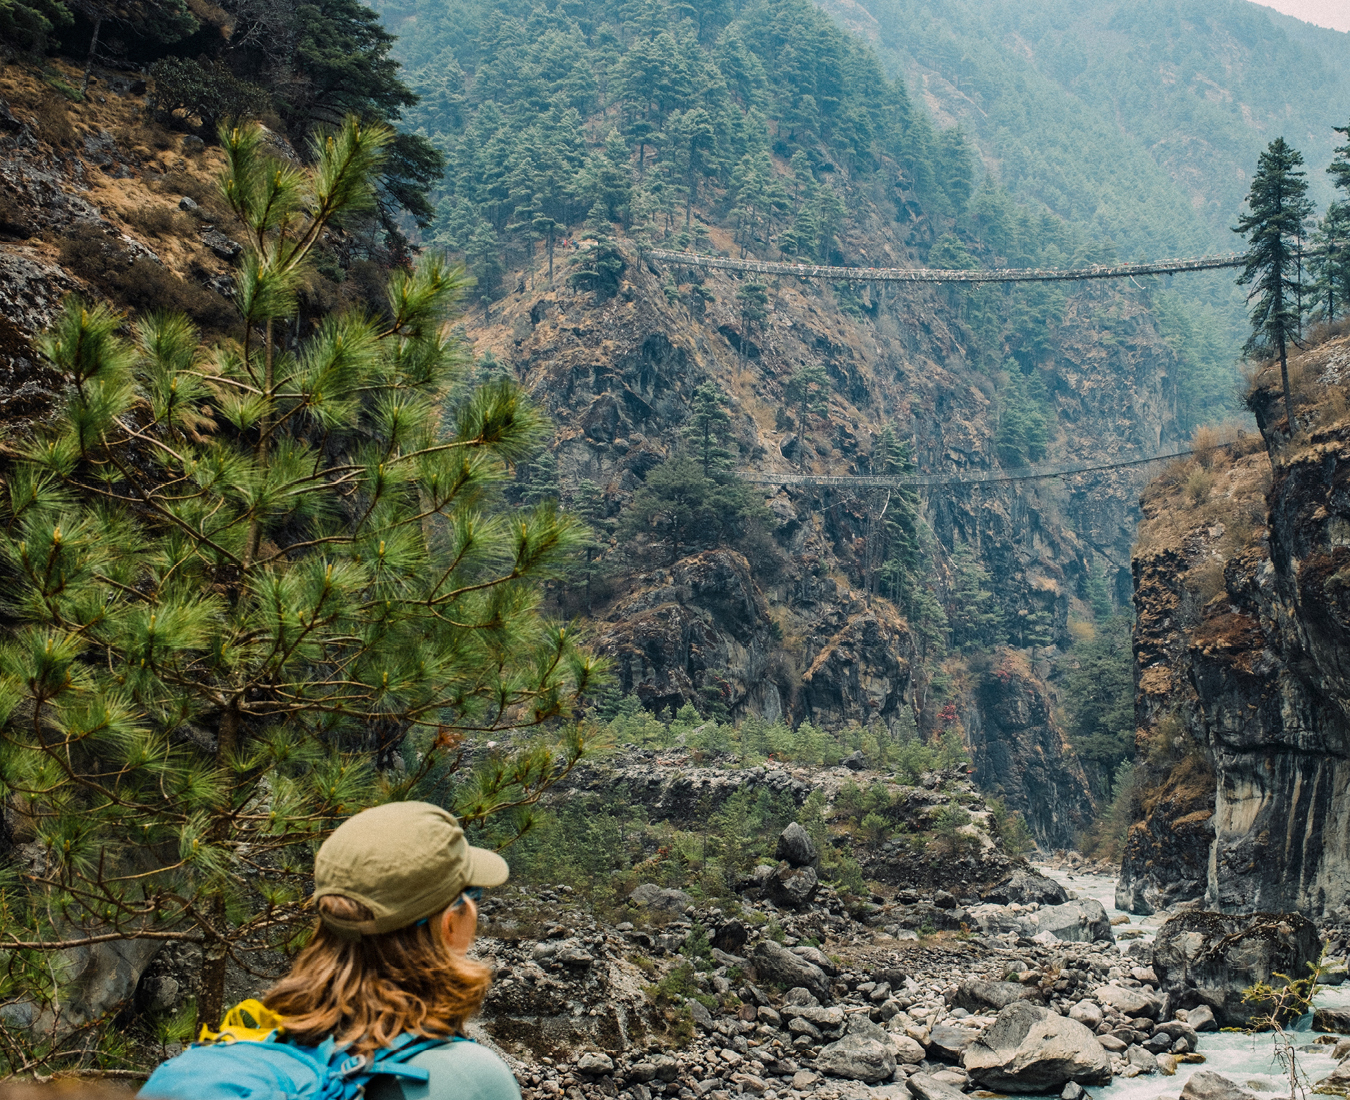 A trekker in the lower reaches of the Khumbu looks up at the twin bridges across the Dudhi Koshi river below Namche Bazaar.